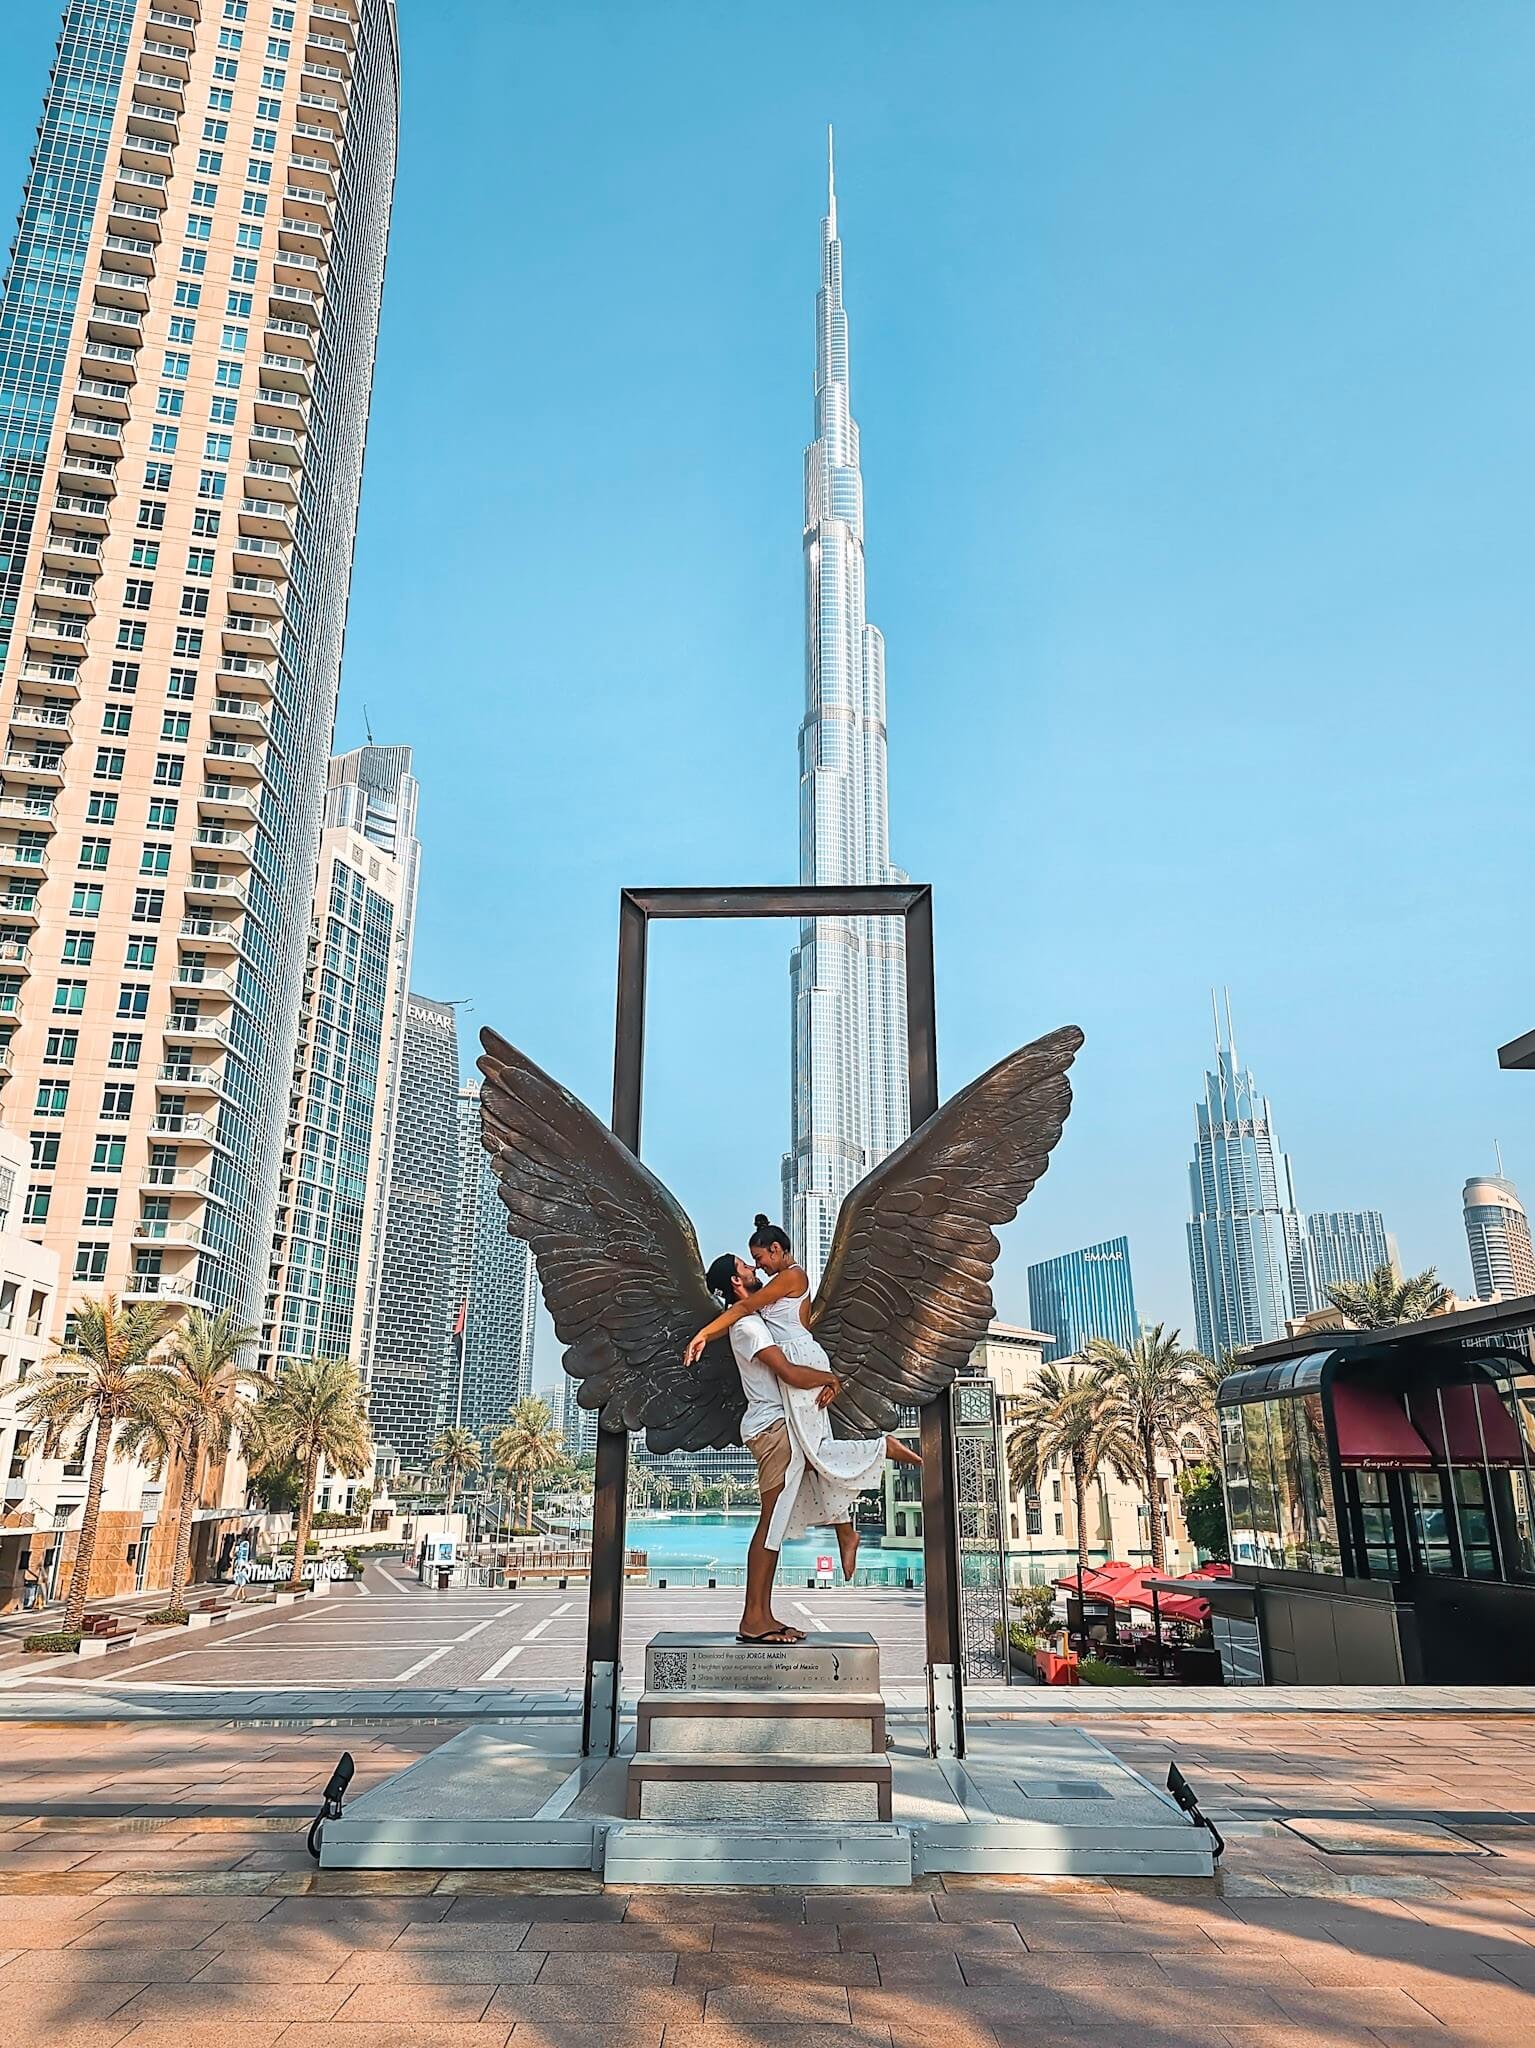 Wings of Mexico at the Burj Khalifa, things to do in Dubai in 1 day